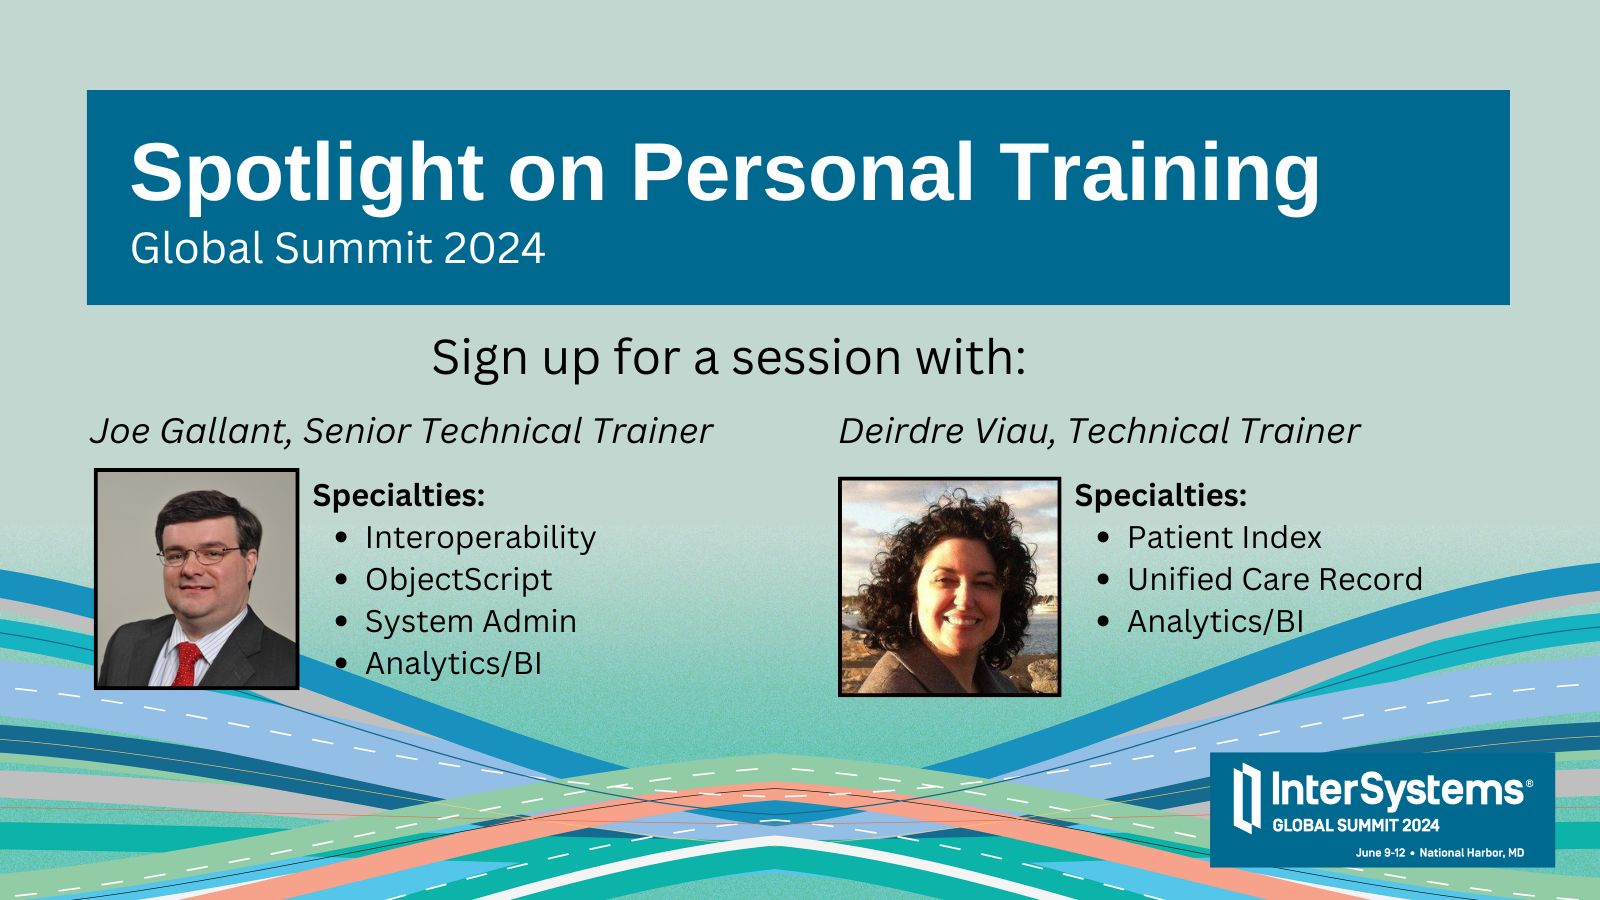 Spotlight on Personal Training, Global Summit. Sign up for a session with Joe Gallant or Deirdre Viau, Technical Trainers.